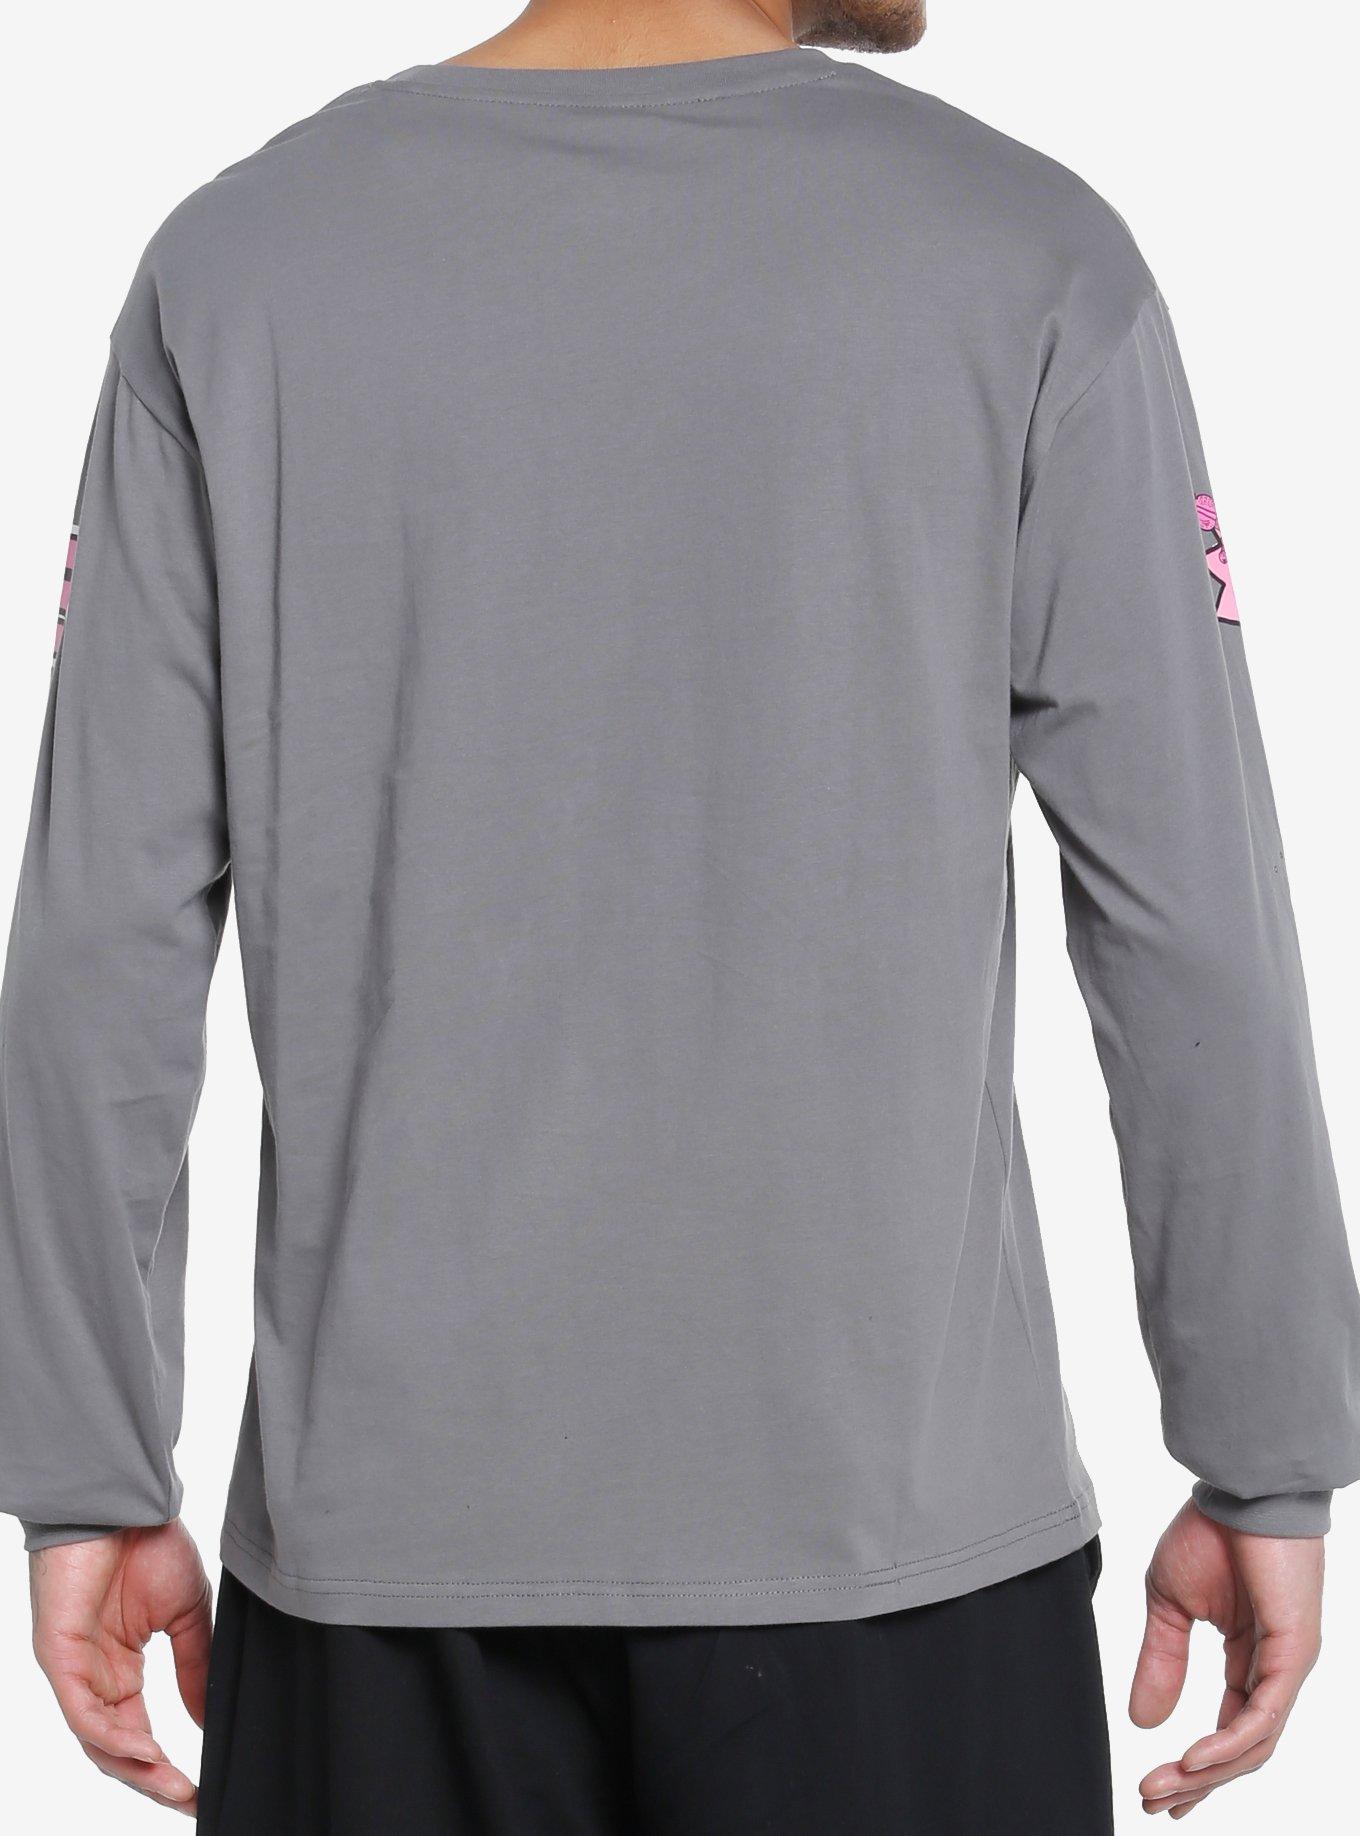 Killer Klowns From Outer Space Pink Tonal Long-Sleeve T-Shirt, GREY, alternate